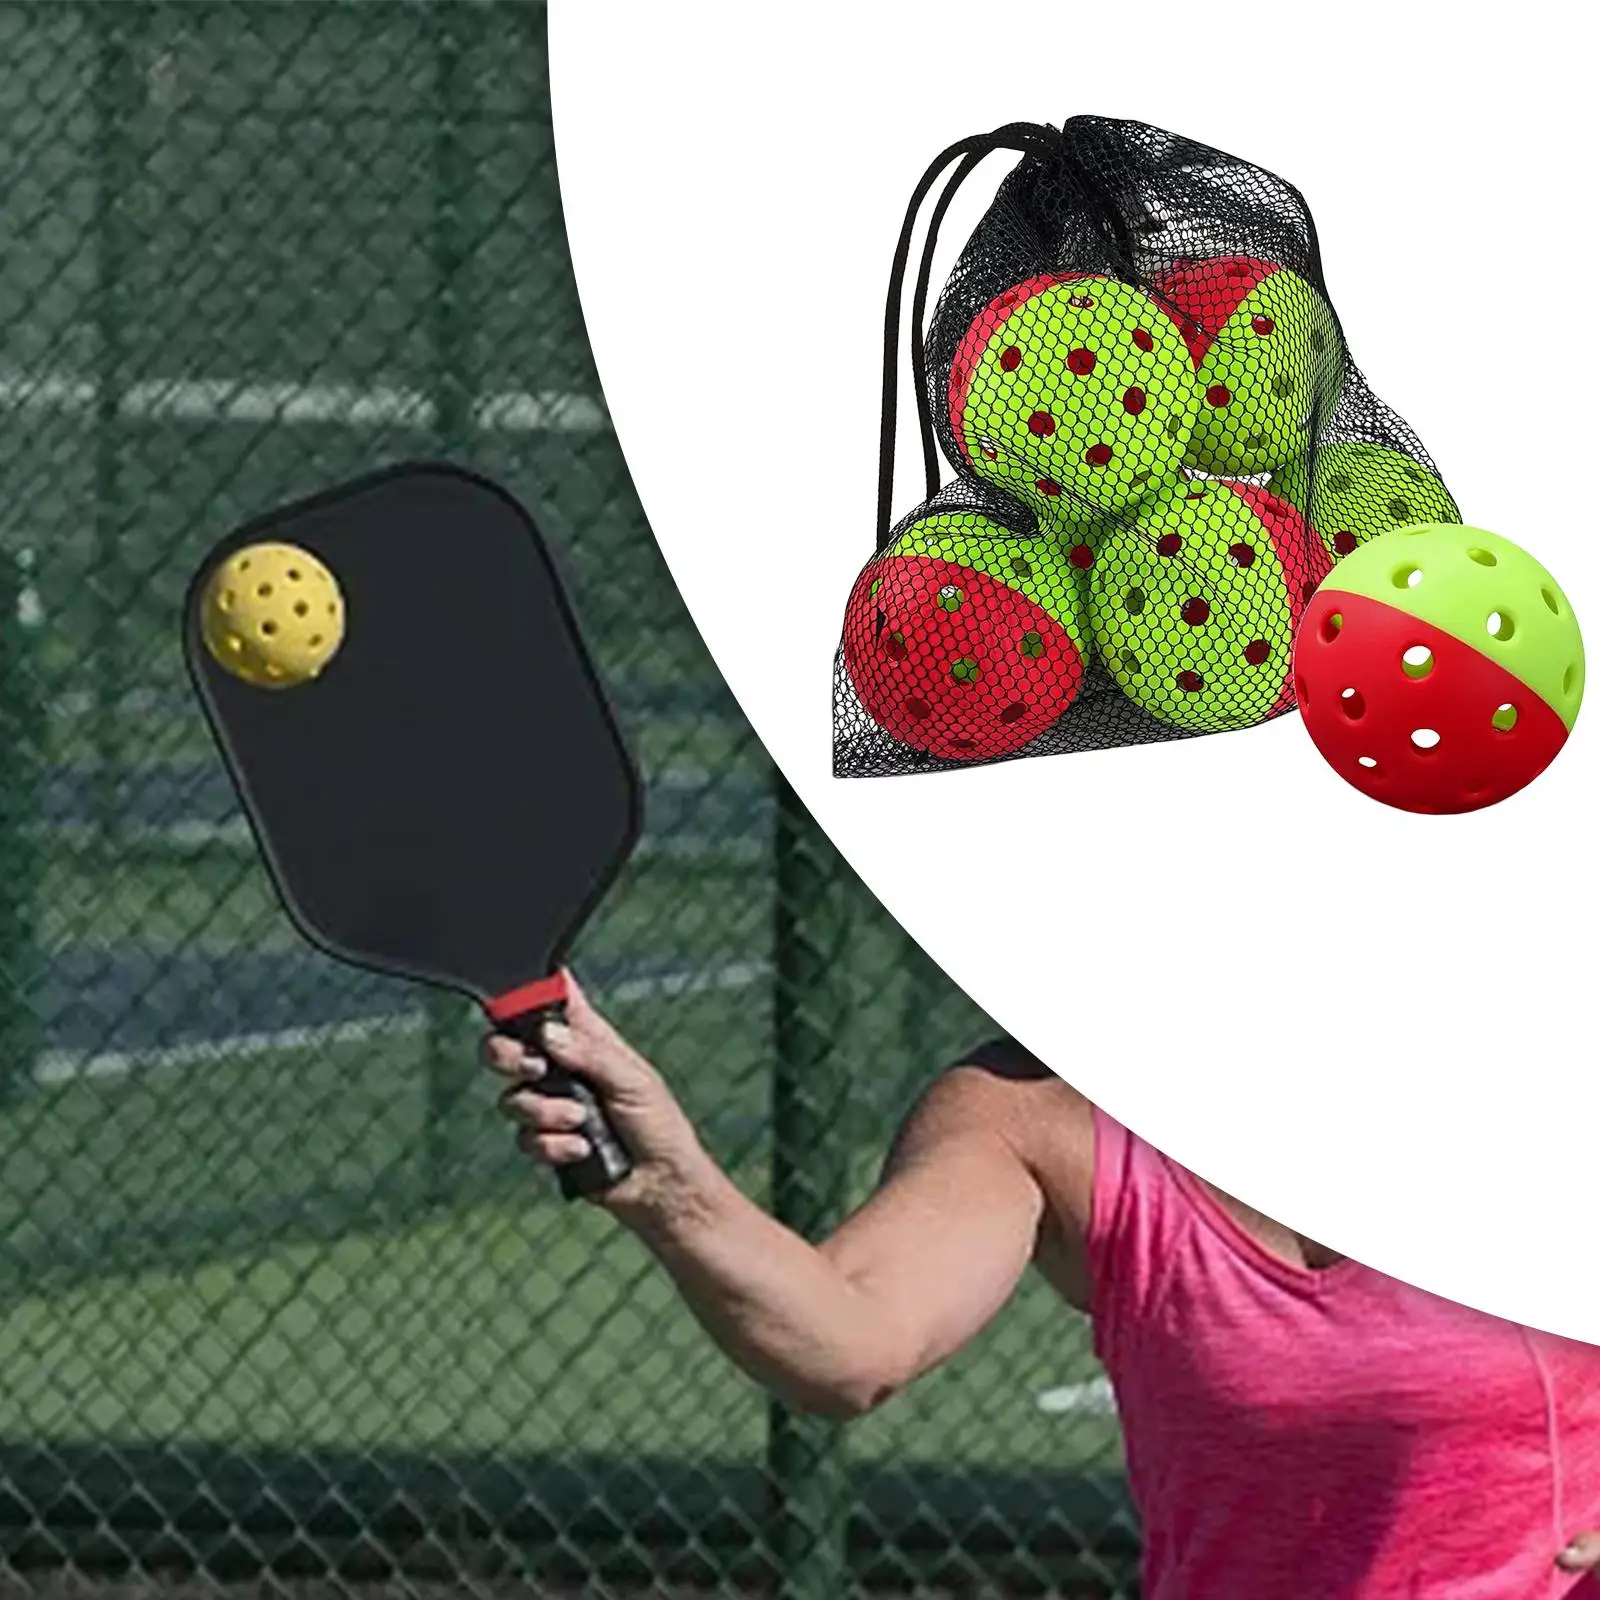 6 Pieces Pickleball Balls Sports Pickle Balls for Professional Perfomance